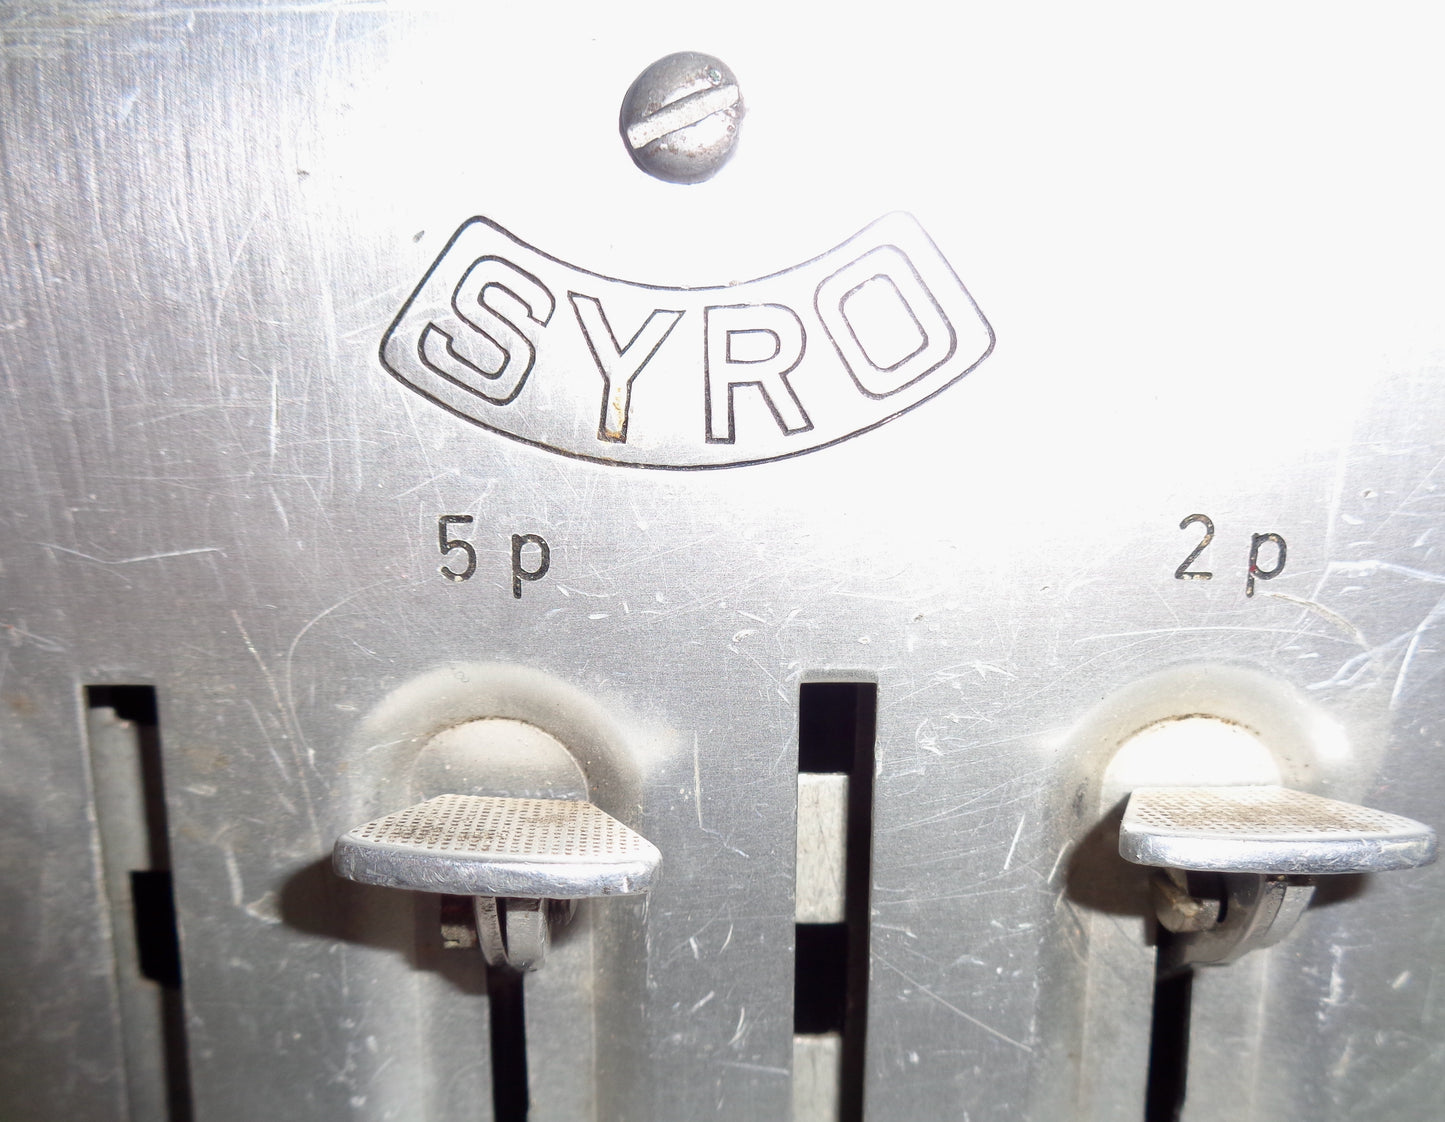 1970s Syro Pendamatic Change / Coin Dispenser Used In Liverpool Bus OKB77